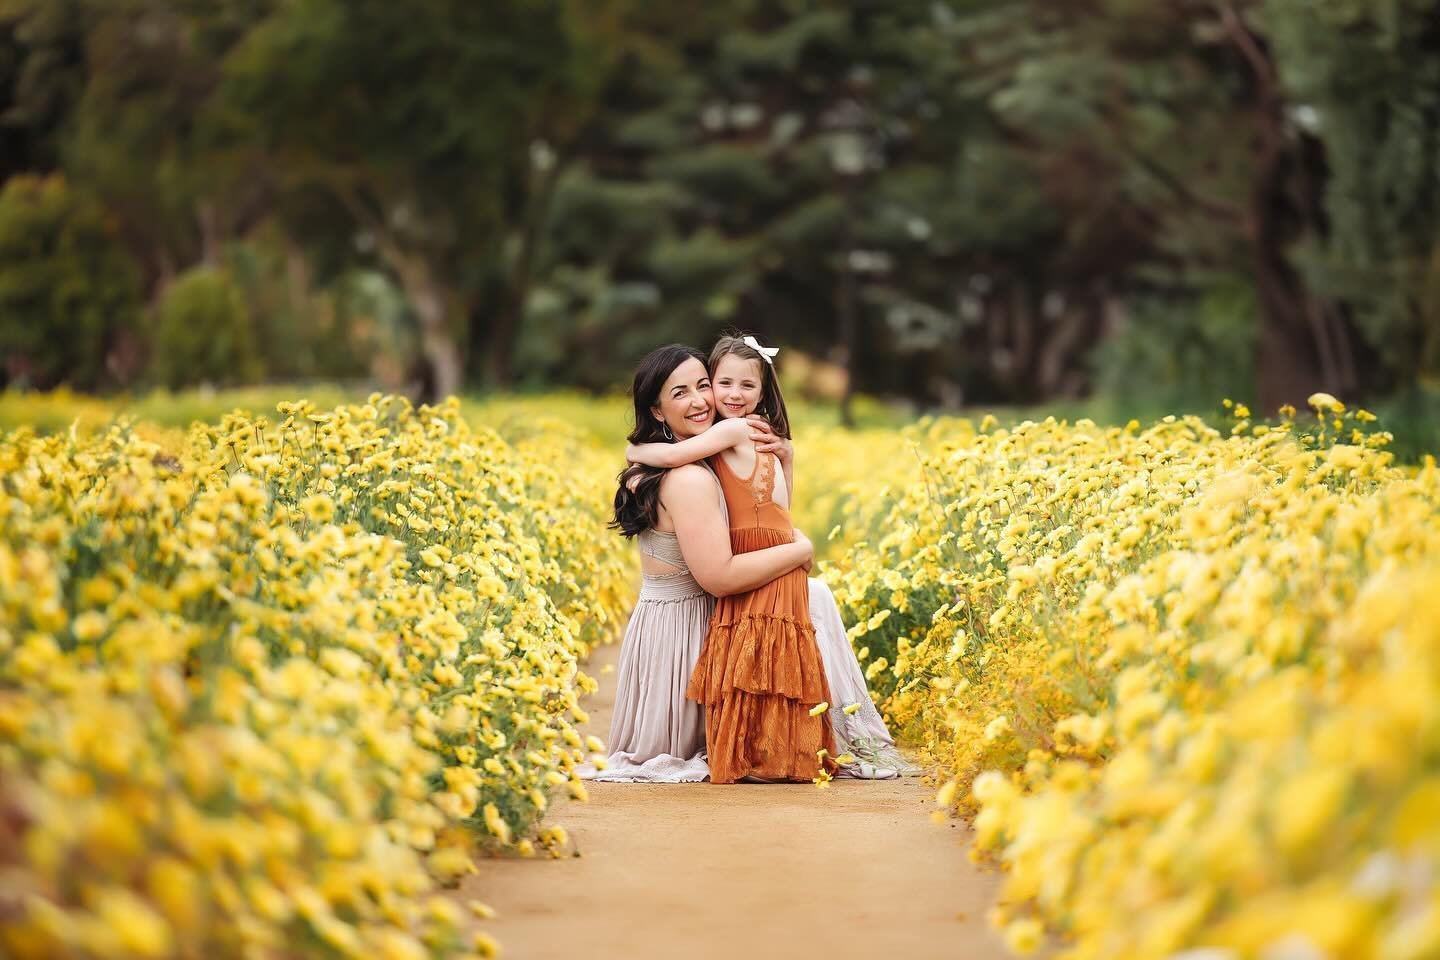 🌼Yellow flower minis: Sunset, May 4th in San Jose 🌼

Choosing a cover photo was sooo difficult because I love this whole set of photos SO much! This location won&rsquo;t last long, so come snag a spot! 

Link in bio to get booked! 

#SanFranciscoPh